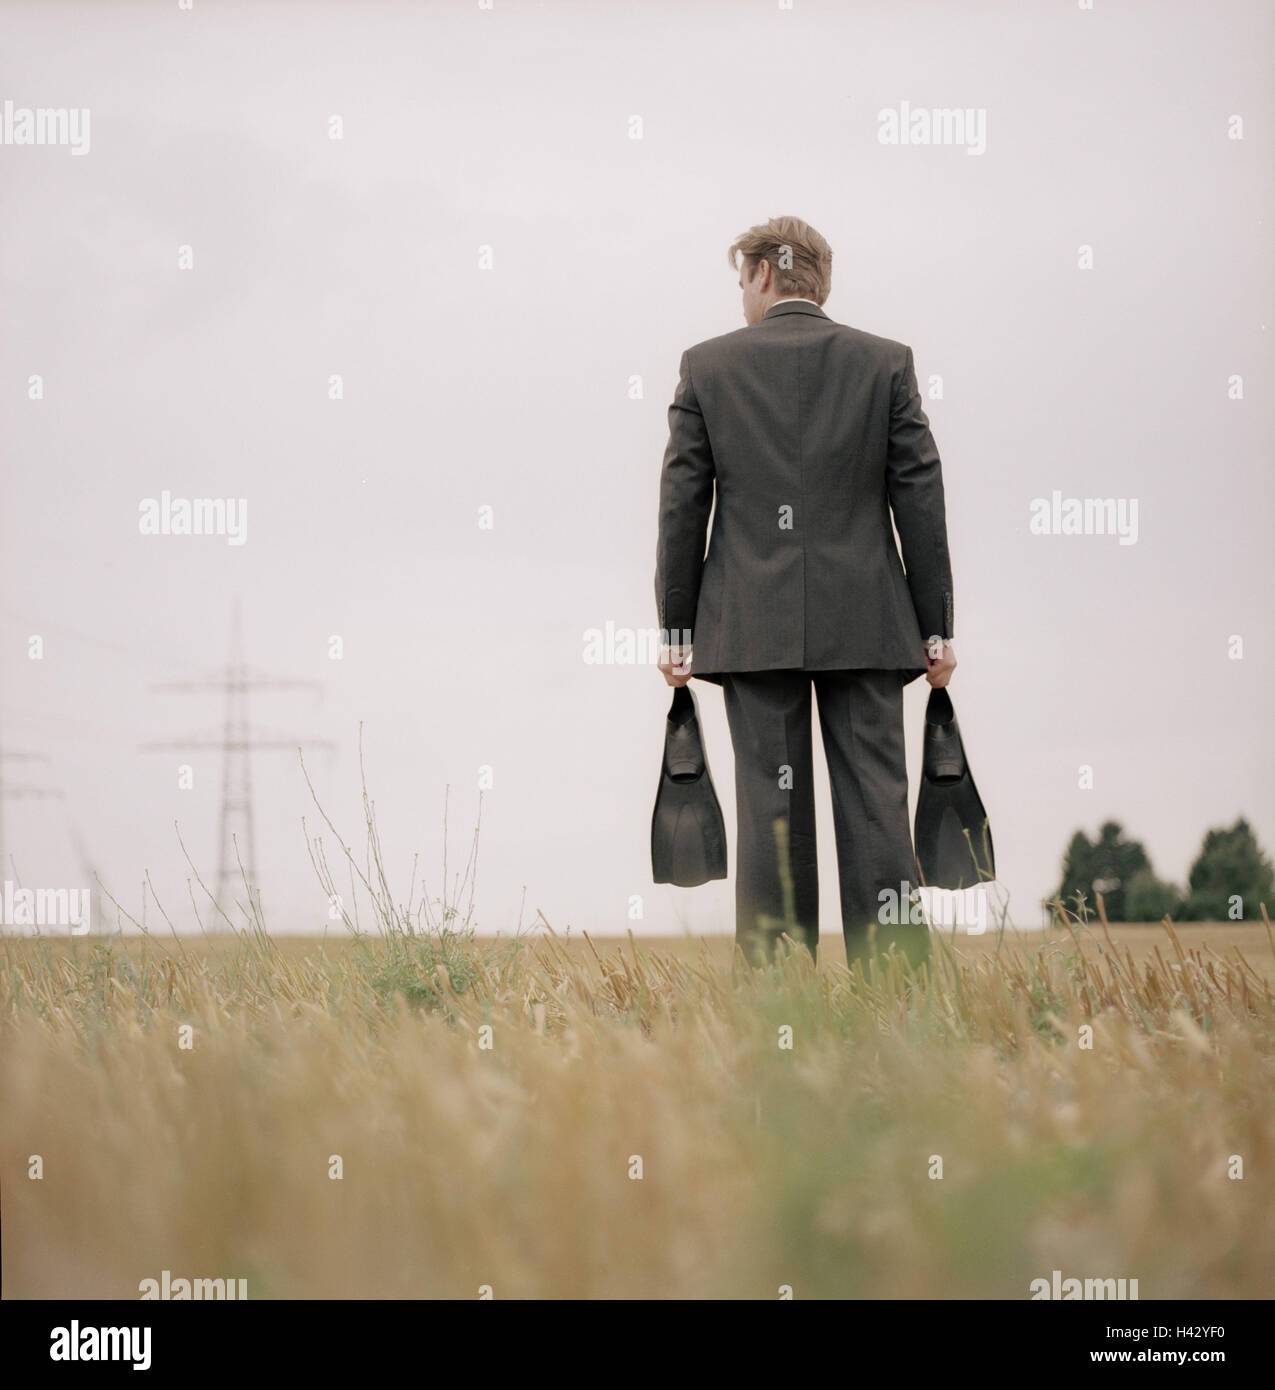 Stubble field, manager, back view, fins, hold, drifting, man, businessman, 30-40 years, drop-outs, ready for of a holiday, reworks, working-tiredly, longing, business, everyday flight, wish, dream, freedom, hopelessness, frustration, anxiety about the fut Stock Photo